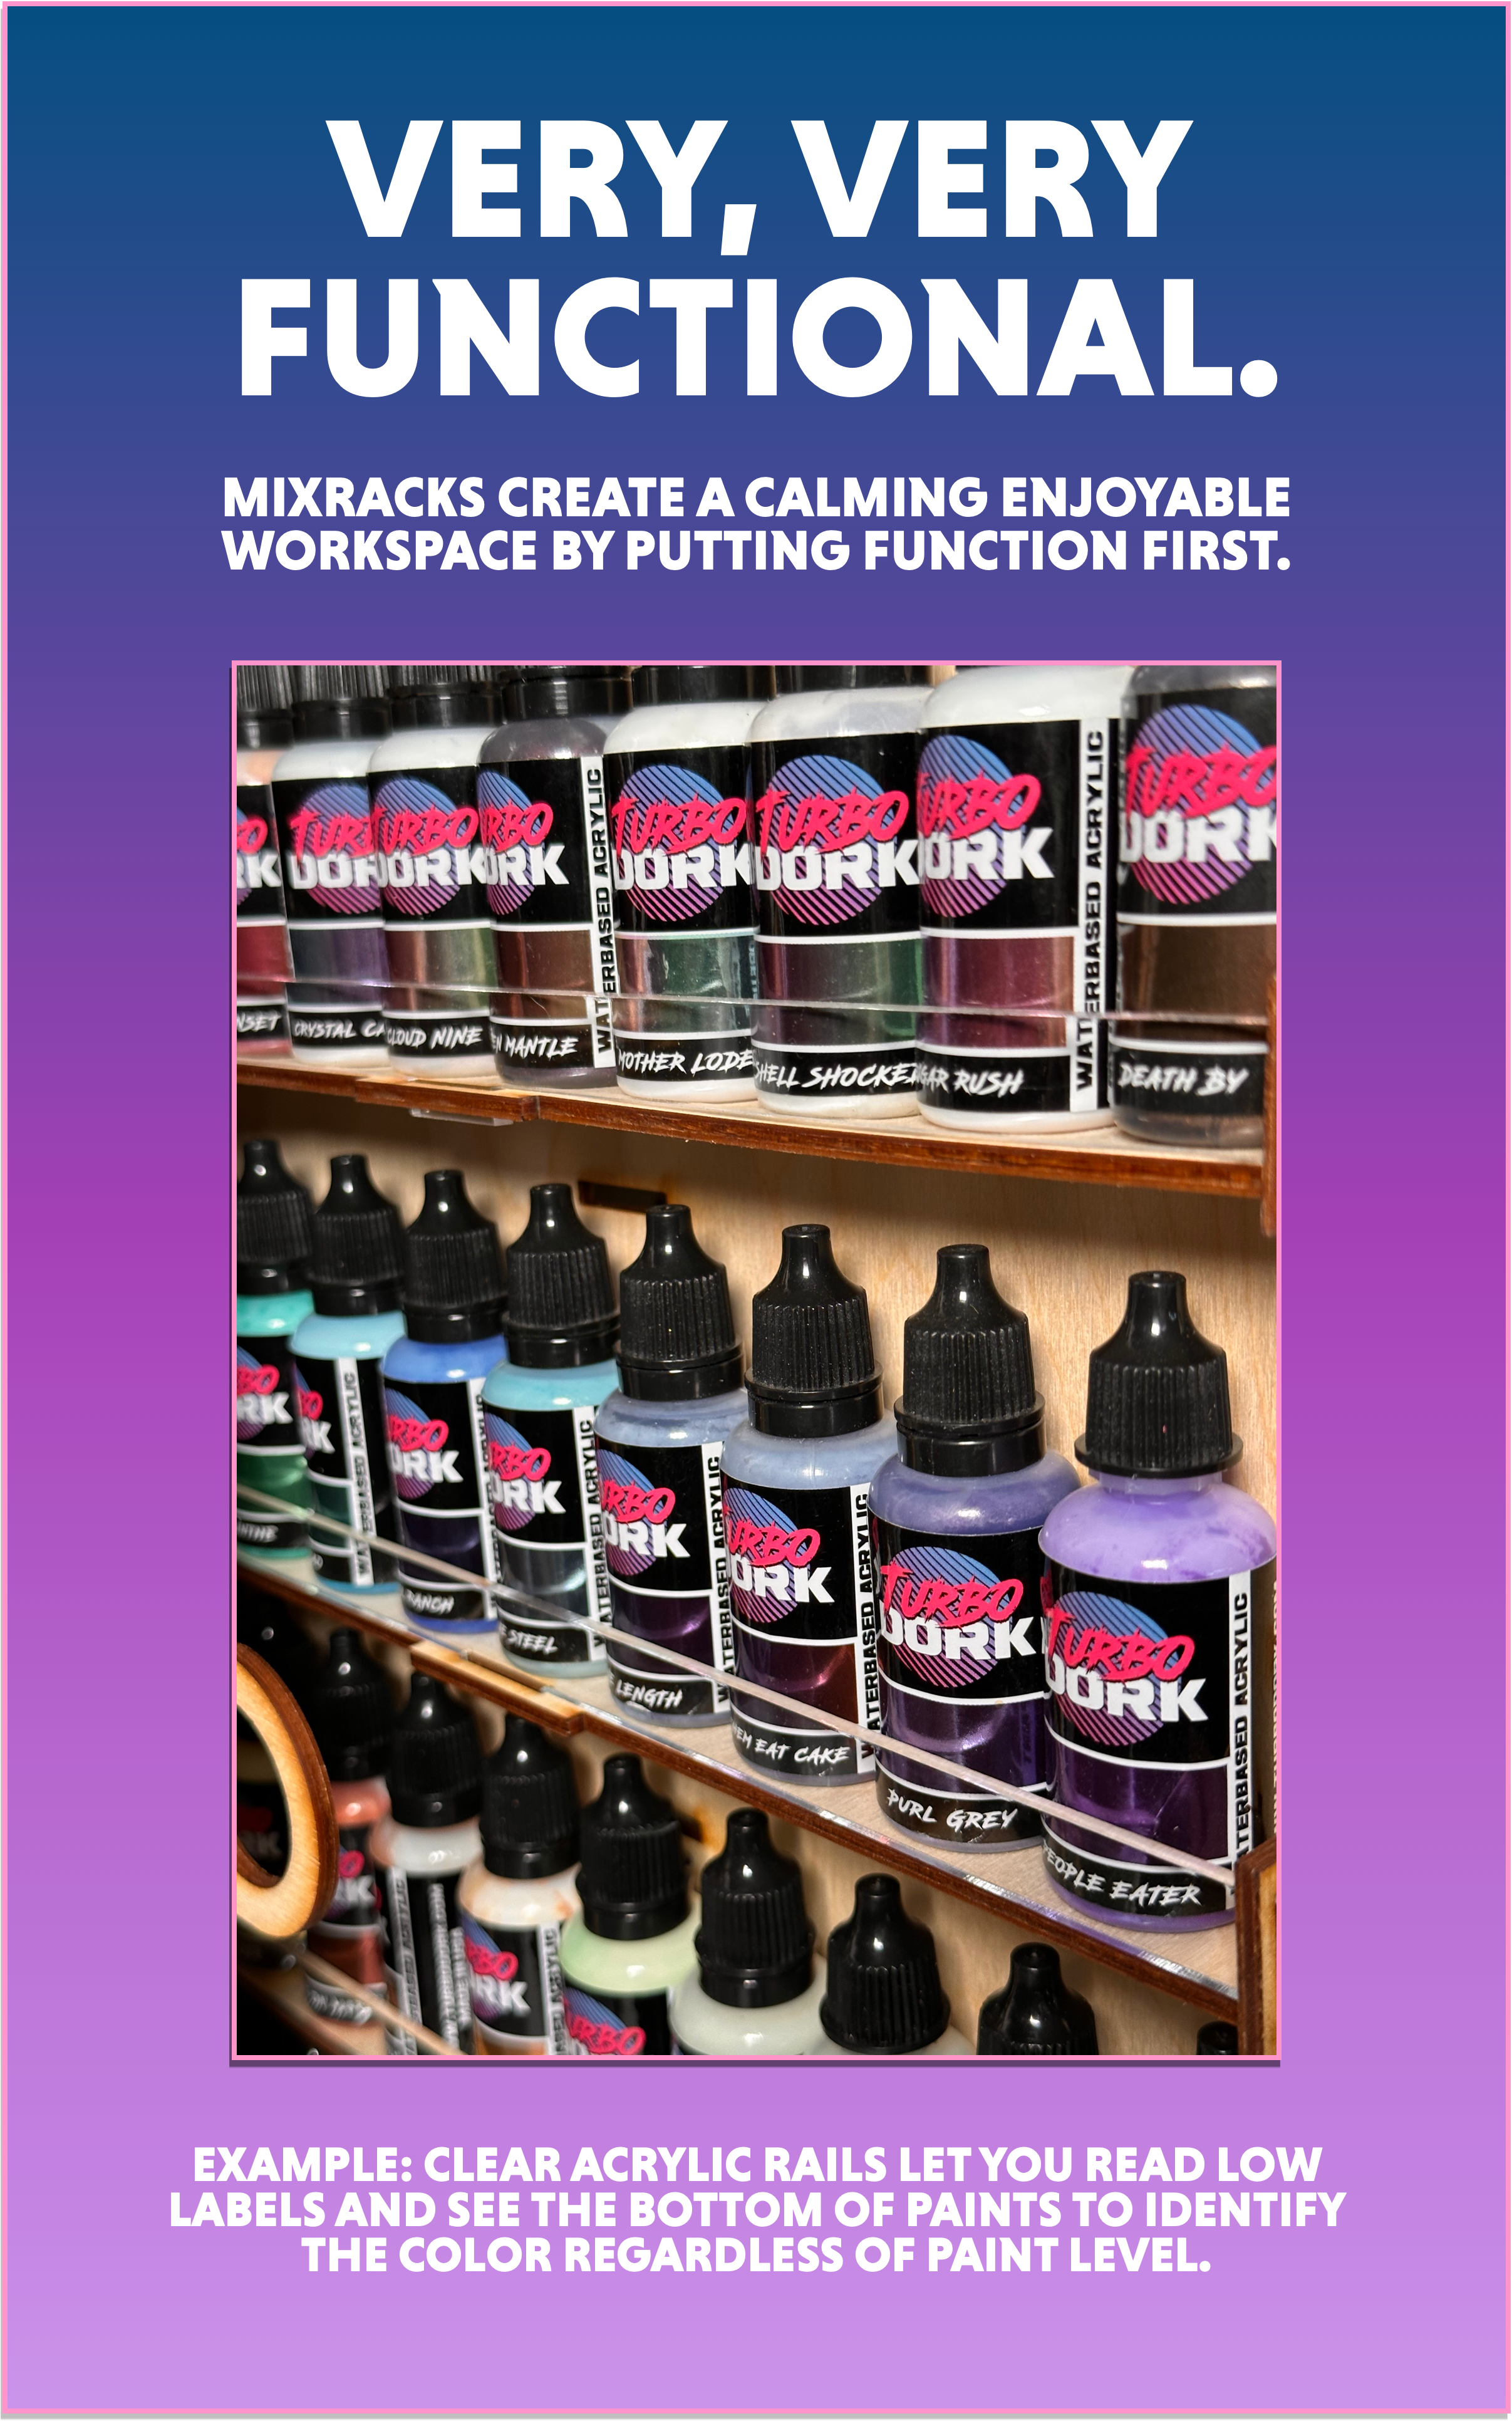 MIXRACK Modular Paint Storage & Hobby Workstation Project is Live!